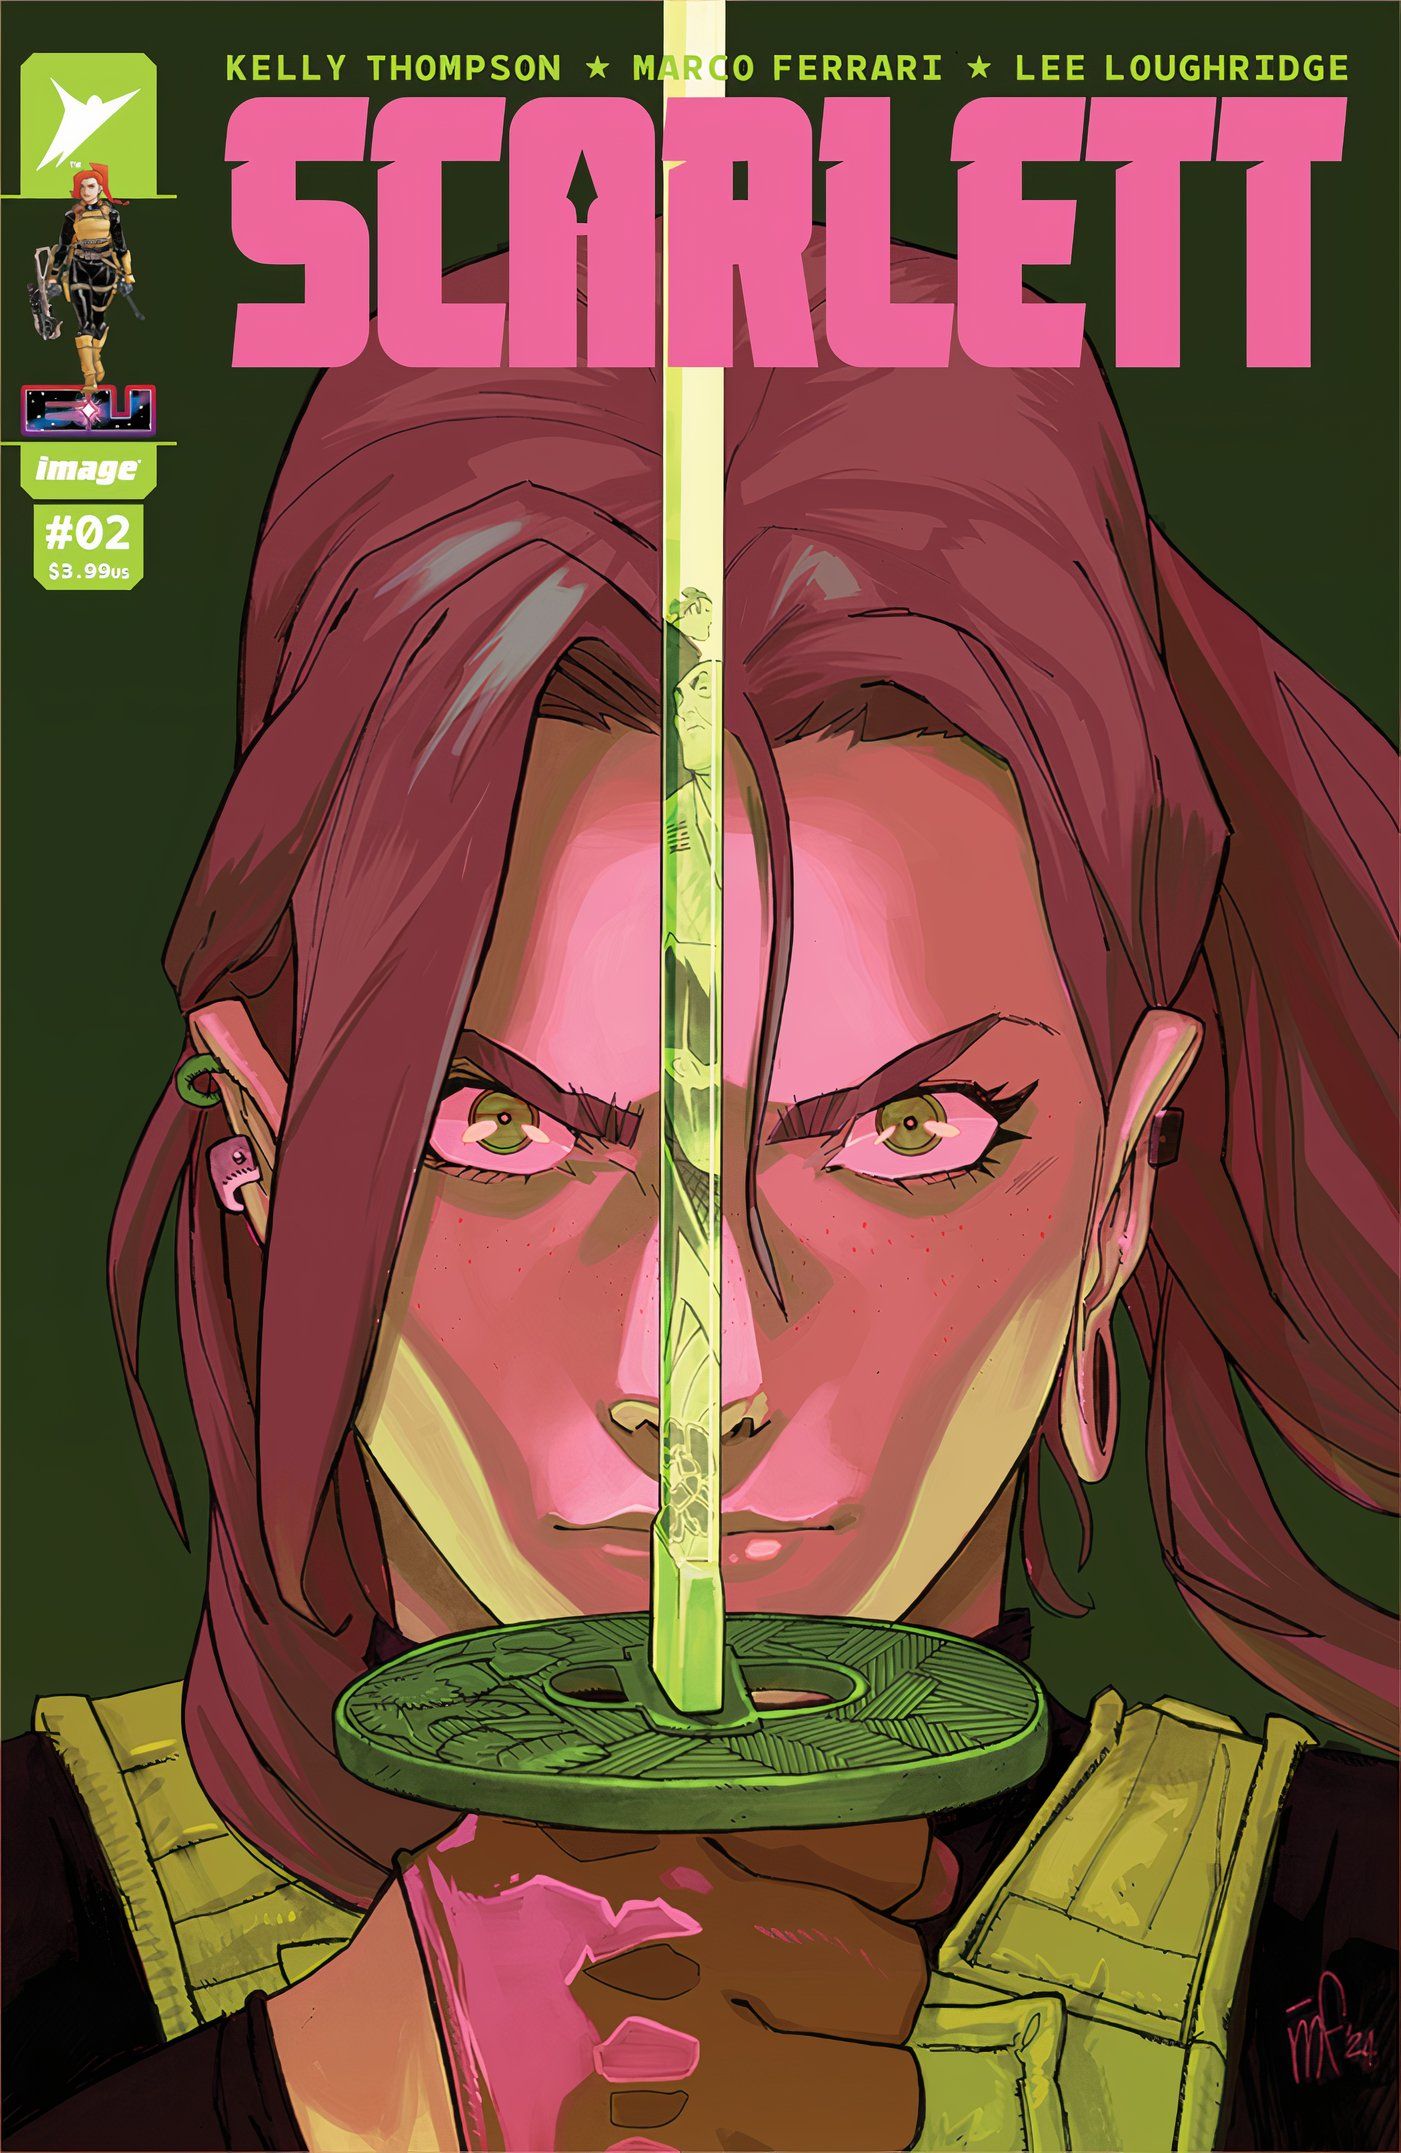 Scarlett #2 main cover, Scarlett holds a green-hued samurai sword up in front of her face.